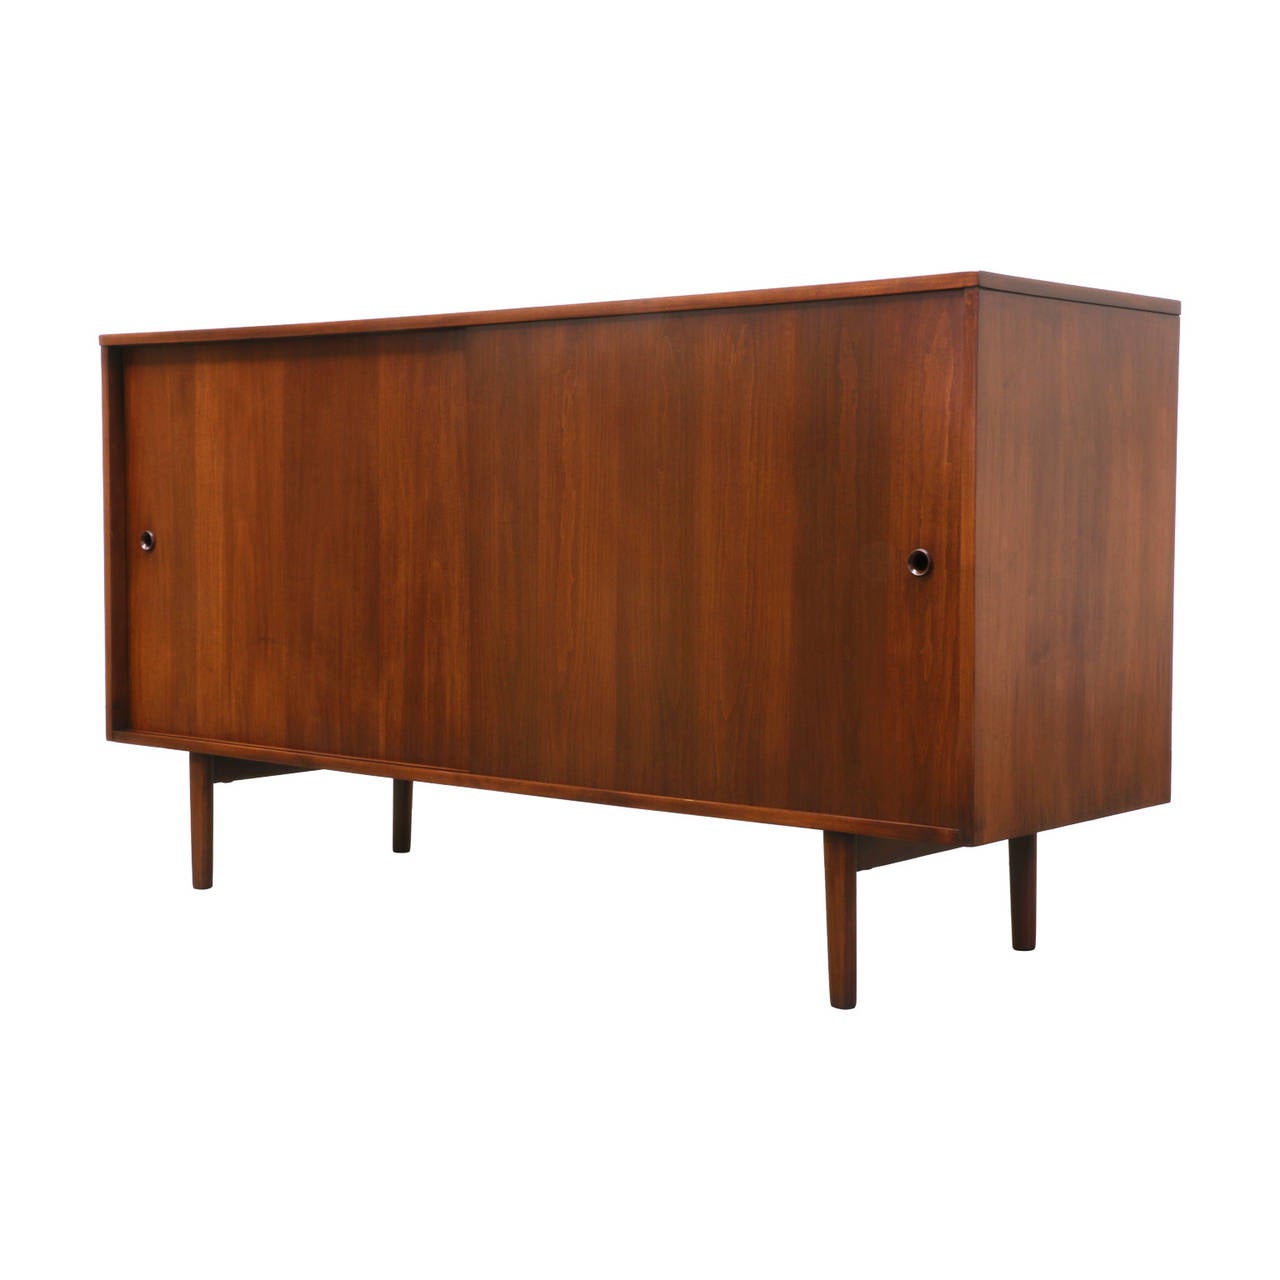 Designer: Paul McCobb
Manufacturer: Winchendon Furniture “Planner Group”
Period/Style: Mid Century Modern
Country: United States
Date: 1950’s

Dimensions: 32″H x 60″L x 18.25″W
Materials: Birch Stain Walnut
Condition: Excellent – Newly